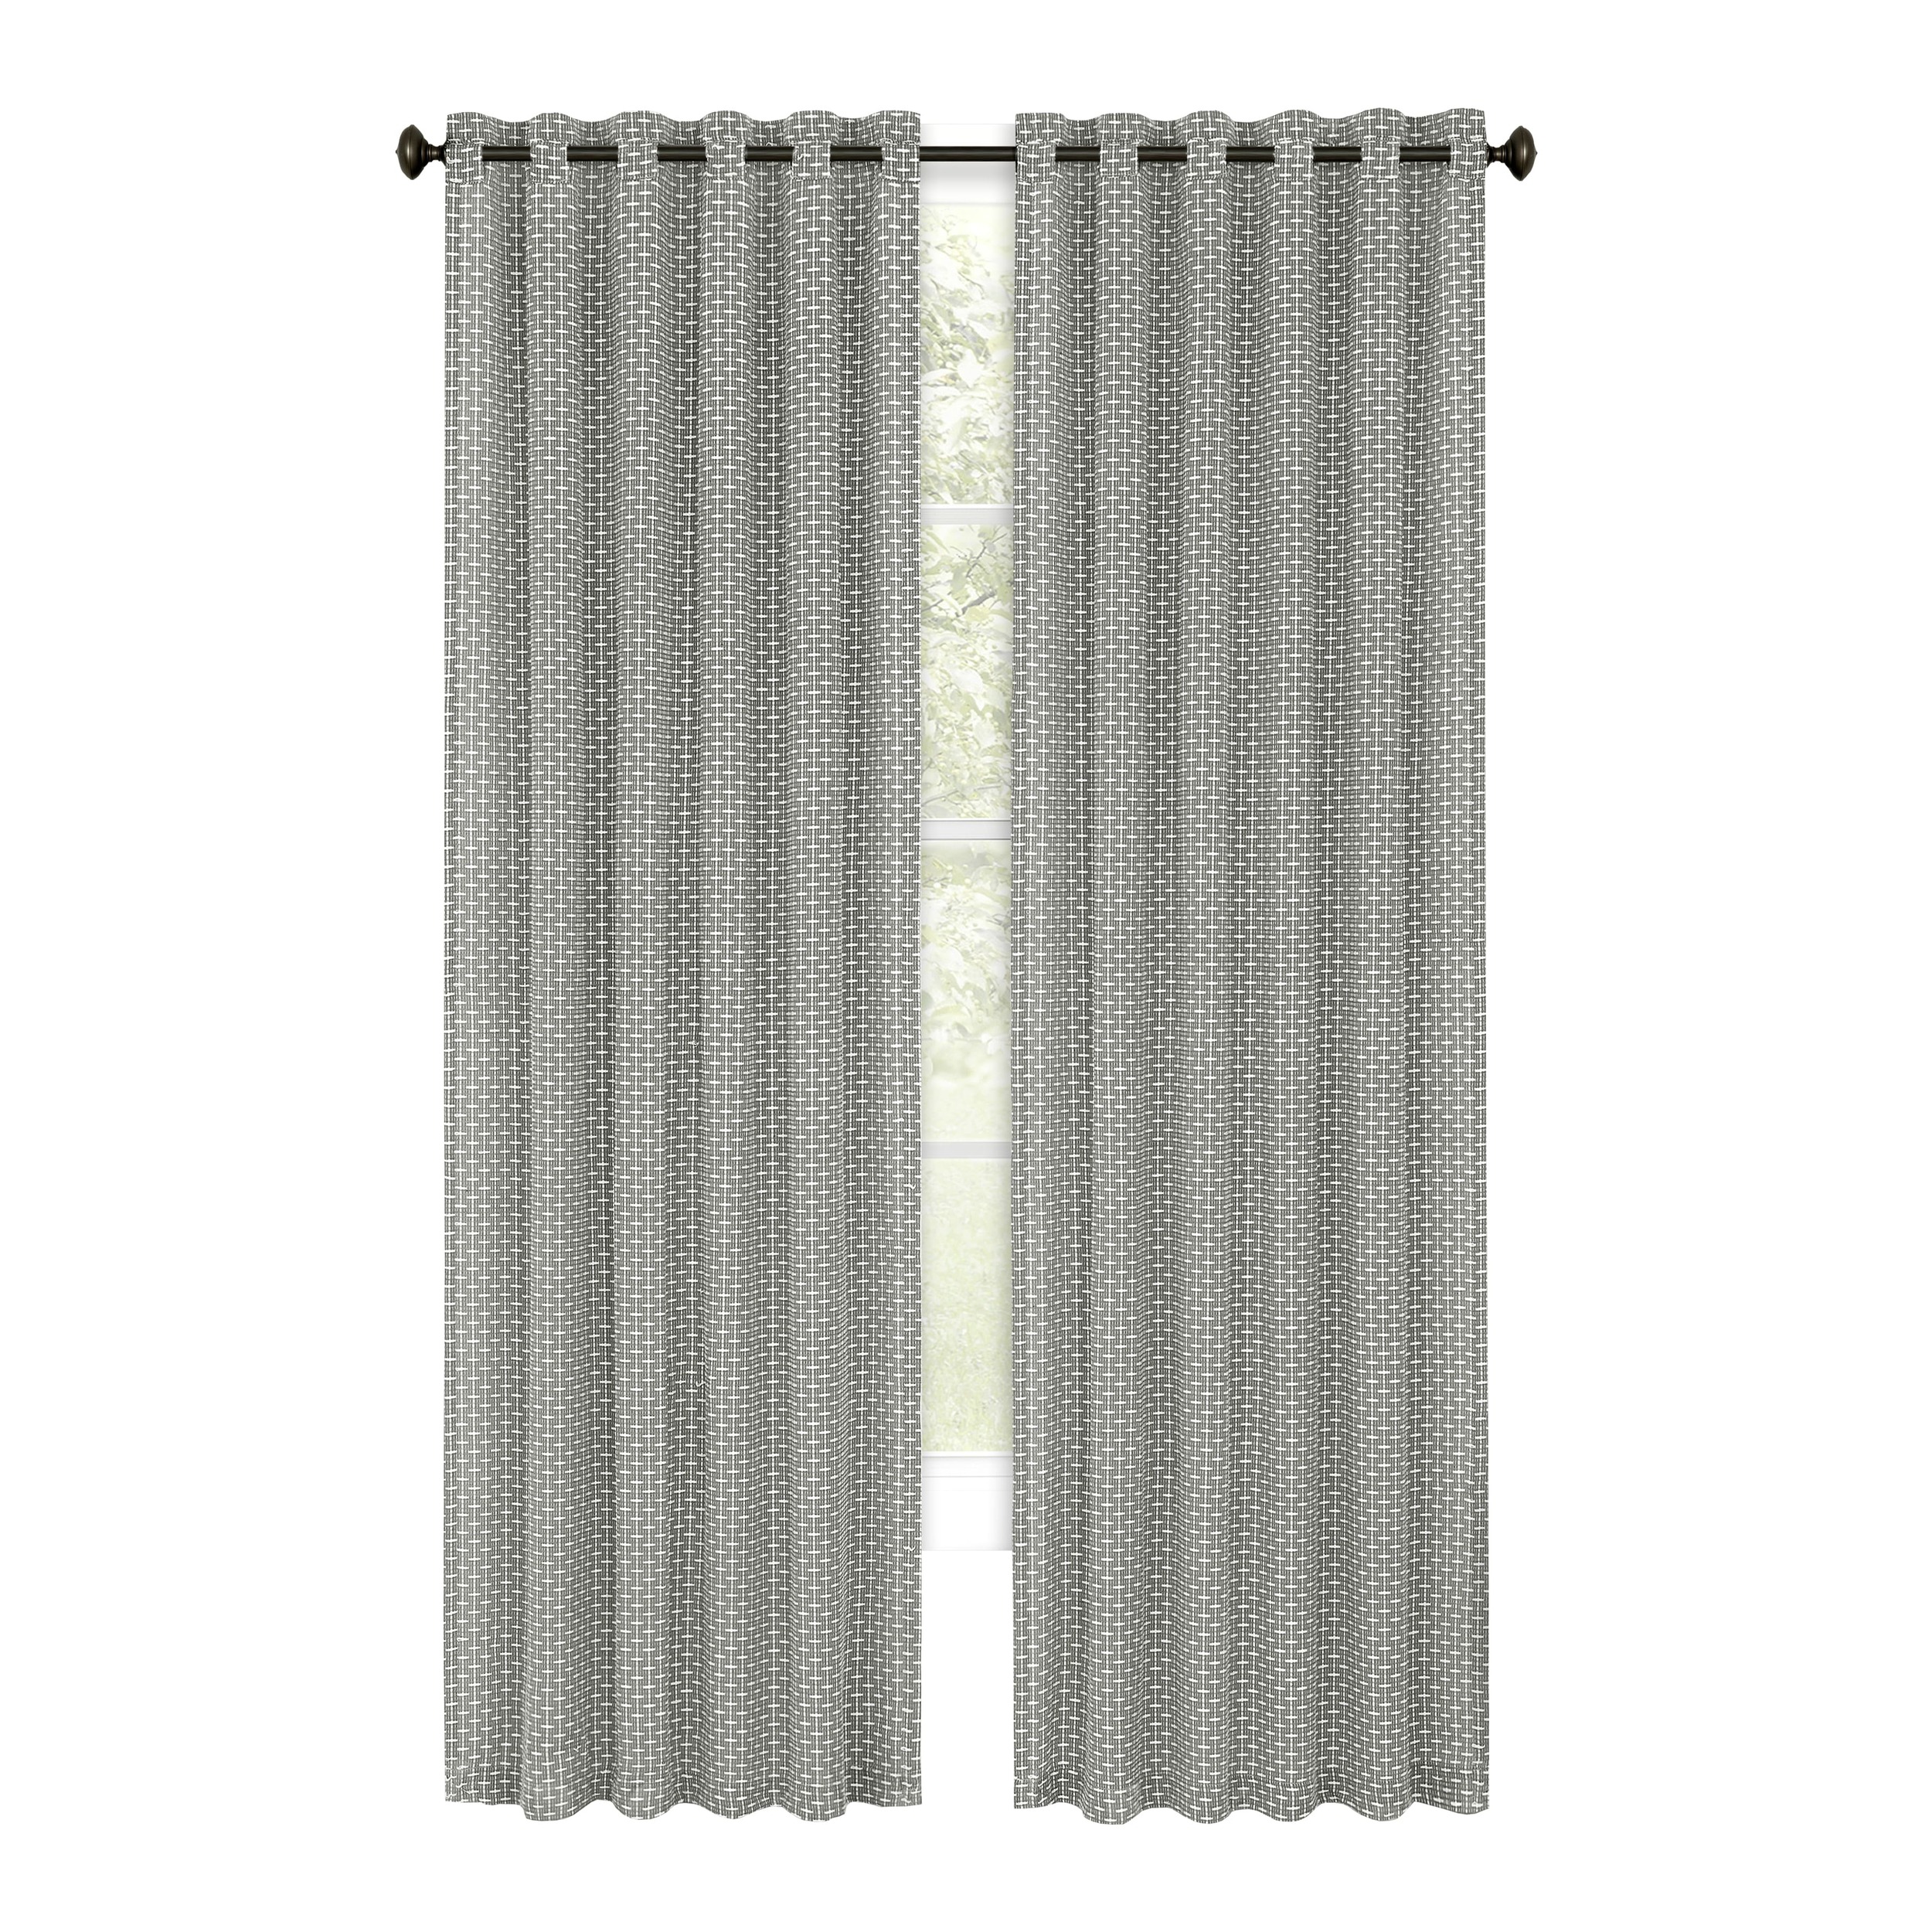 Achim Bedford Front Tab Light Filtering Curtain Panel, Grey, 42" x 84" - image 2 of 5